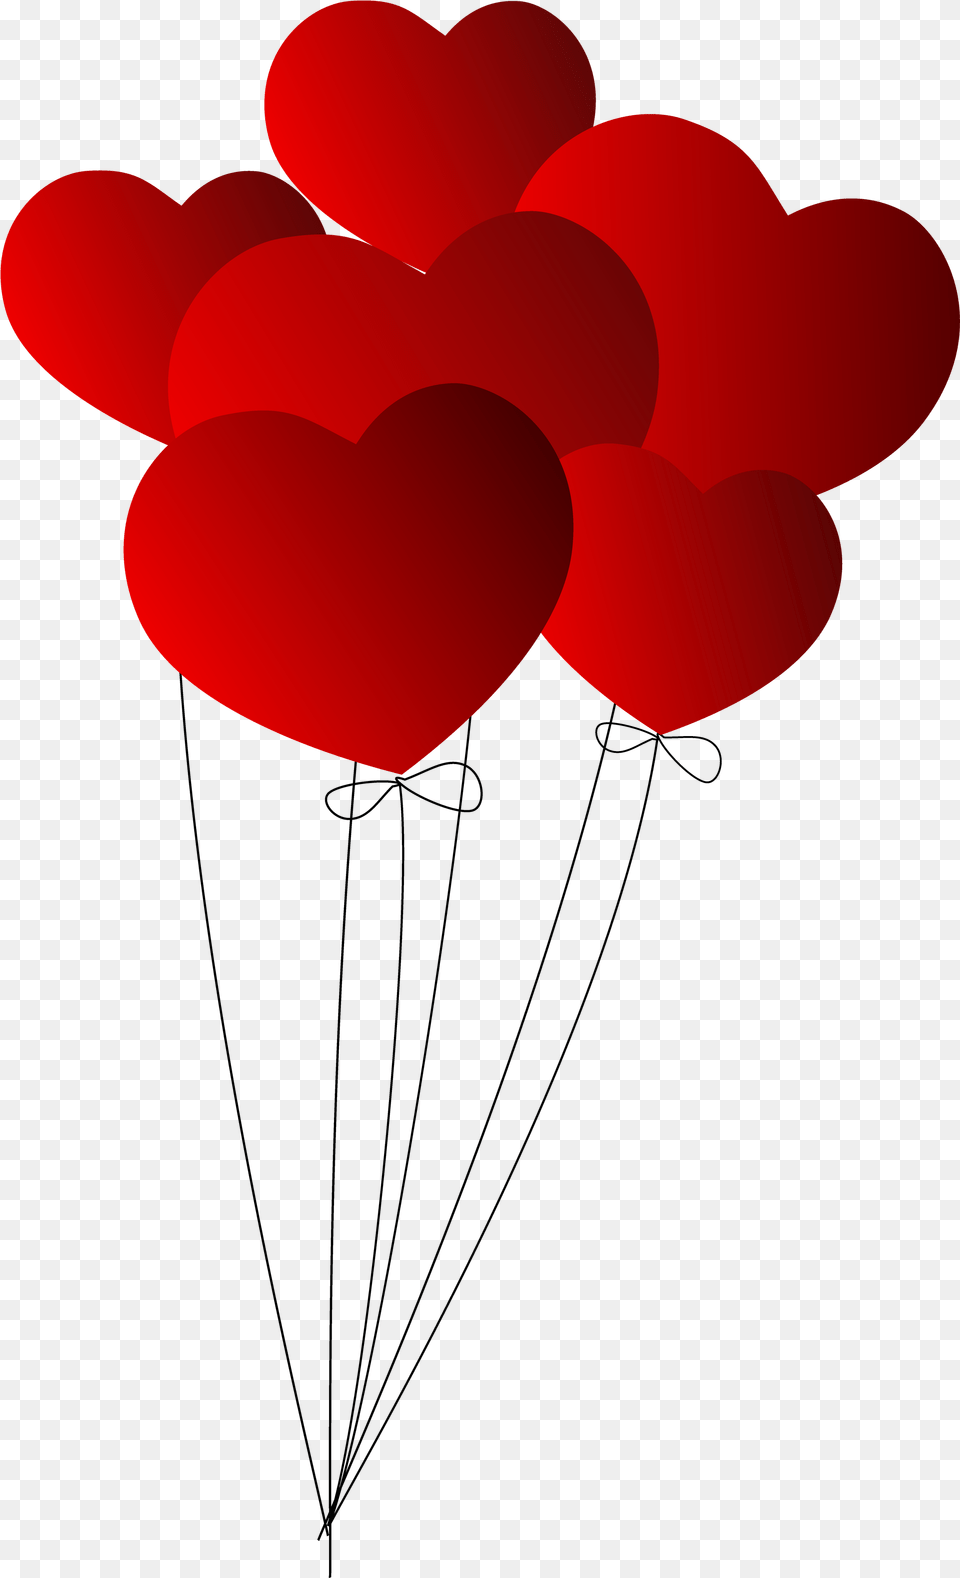 Download Heart Balloon Lithuania Mid Fairfield Project Heart Shaped Balloon, Flower, Plant Png